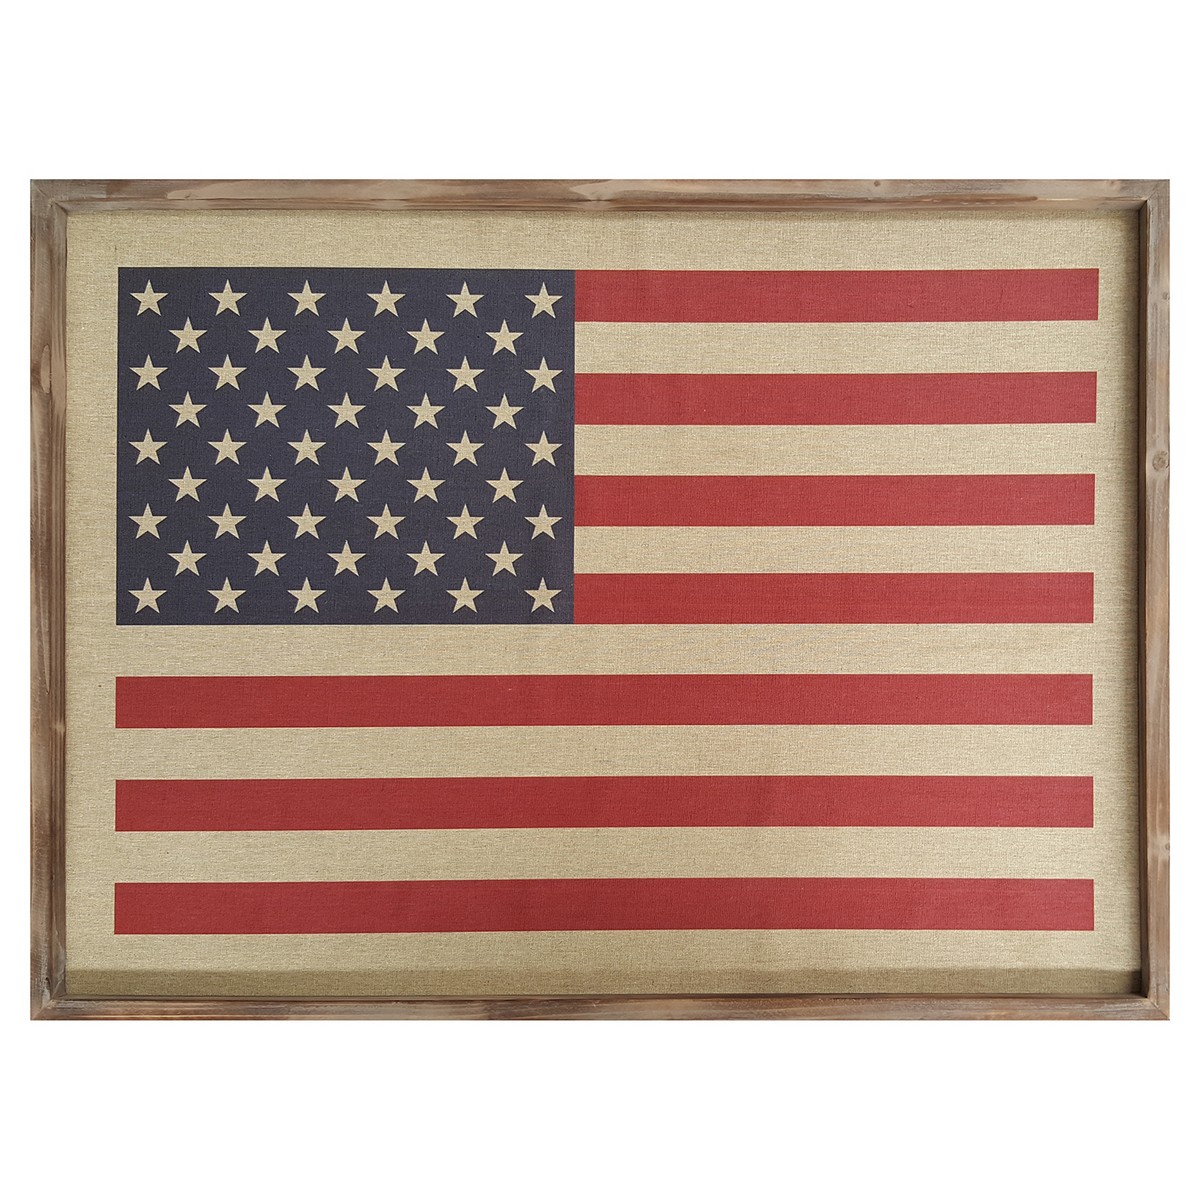 Stratton Home Decor American Flag Wall Art - Natural, Red, Blue